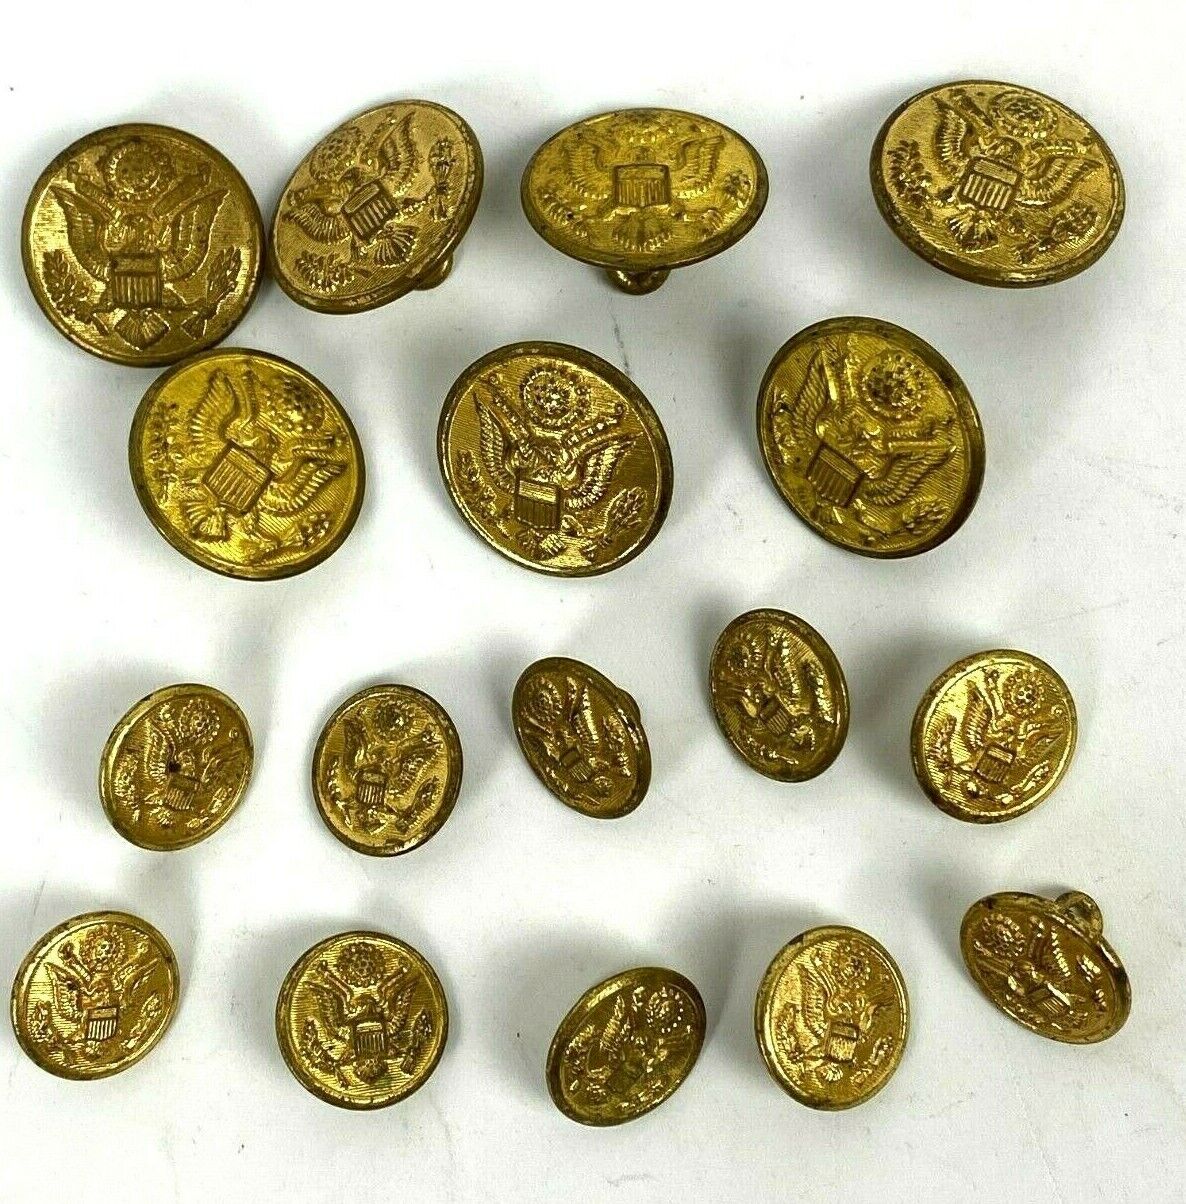 17 WW1 - WW2 US Military Coat Buttons Lot Most Scovill Mfg. Co. Waterbury CT VTG